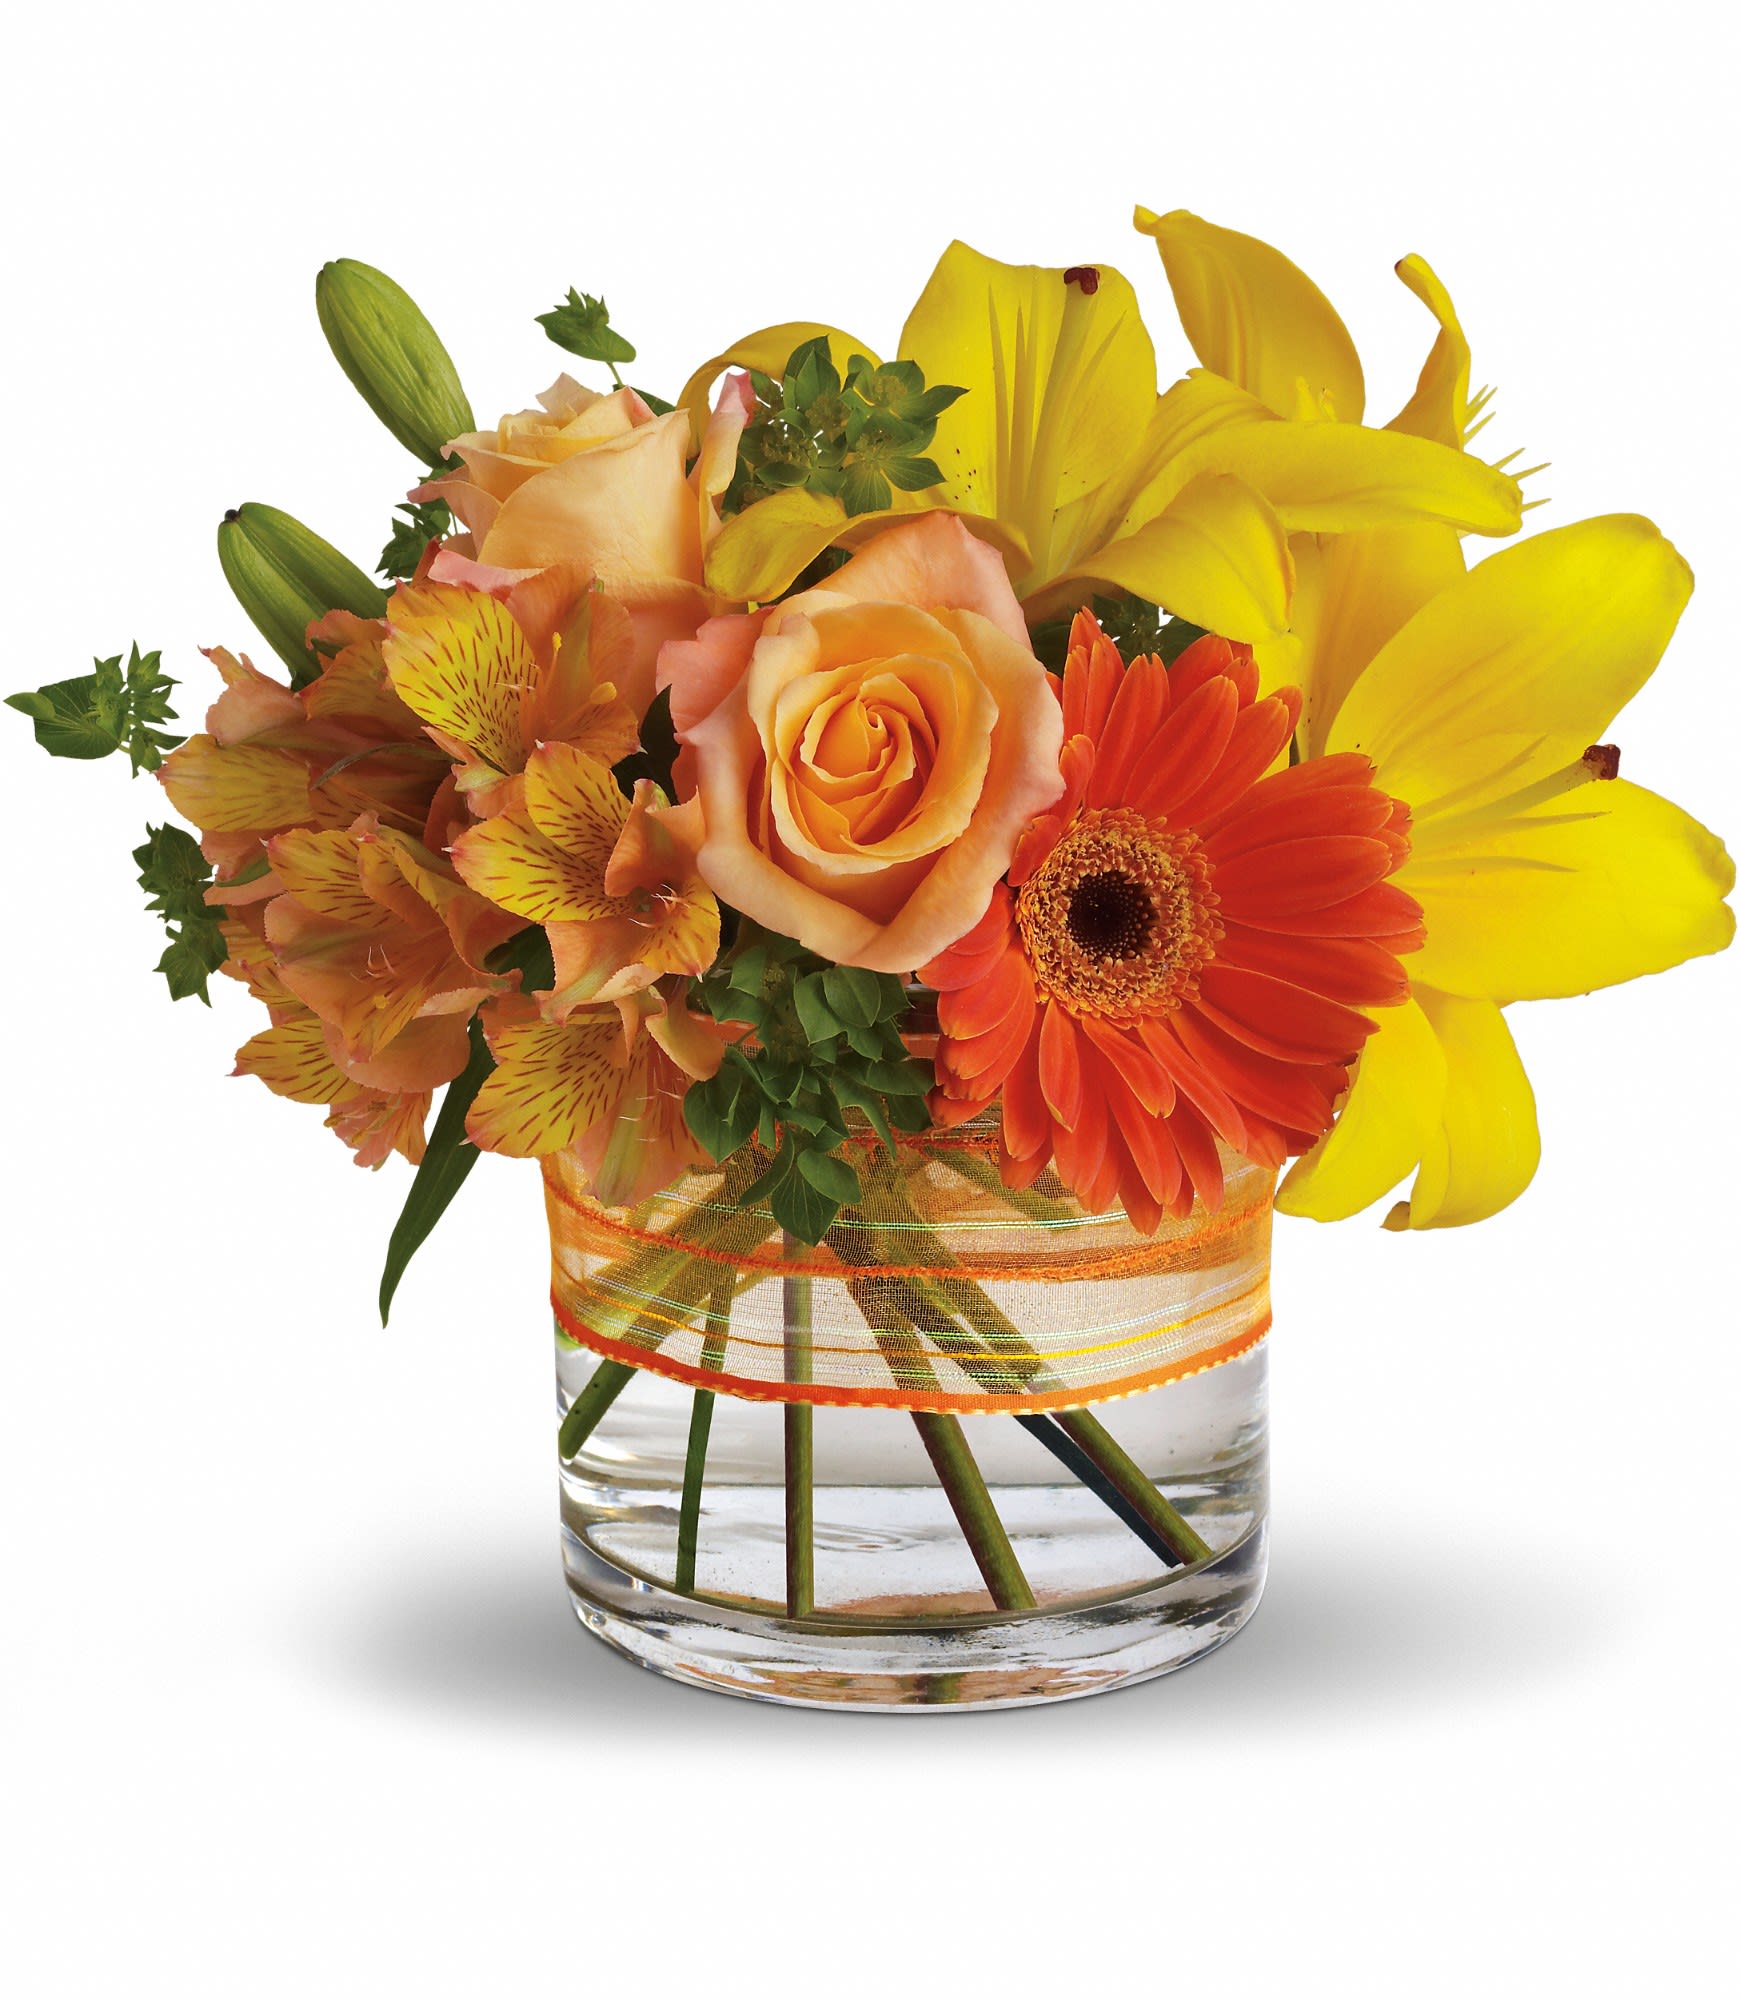  Siesta Fiesta - Know someone who could use a little pick-me-up? Sending this pretty summer arrangement will definitely do the trick. 